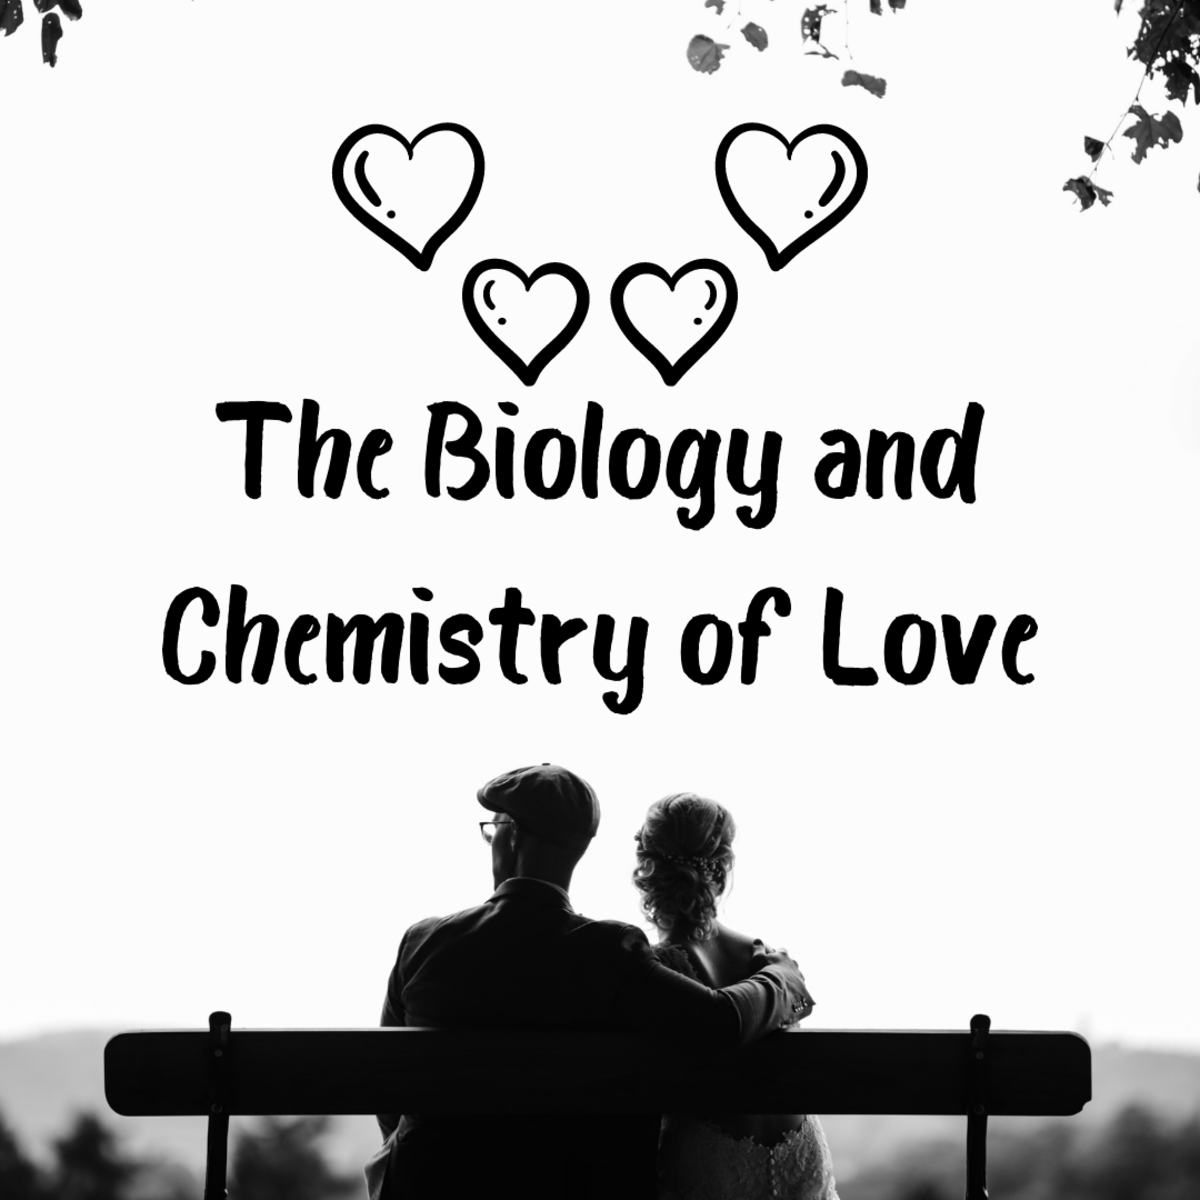 Read on to learn about the biology and chemistry of human love, including how these factors influence mother-child love and romantic love.